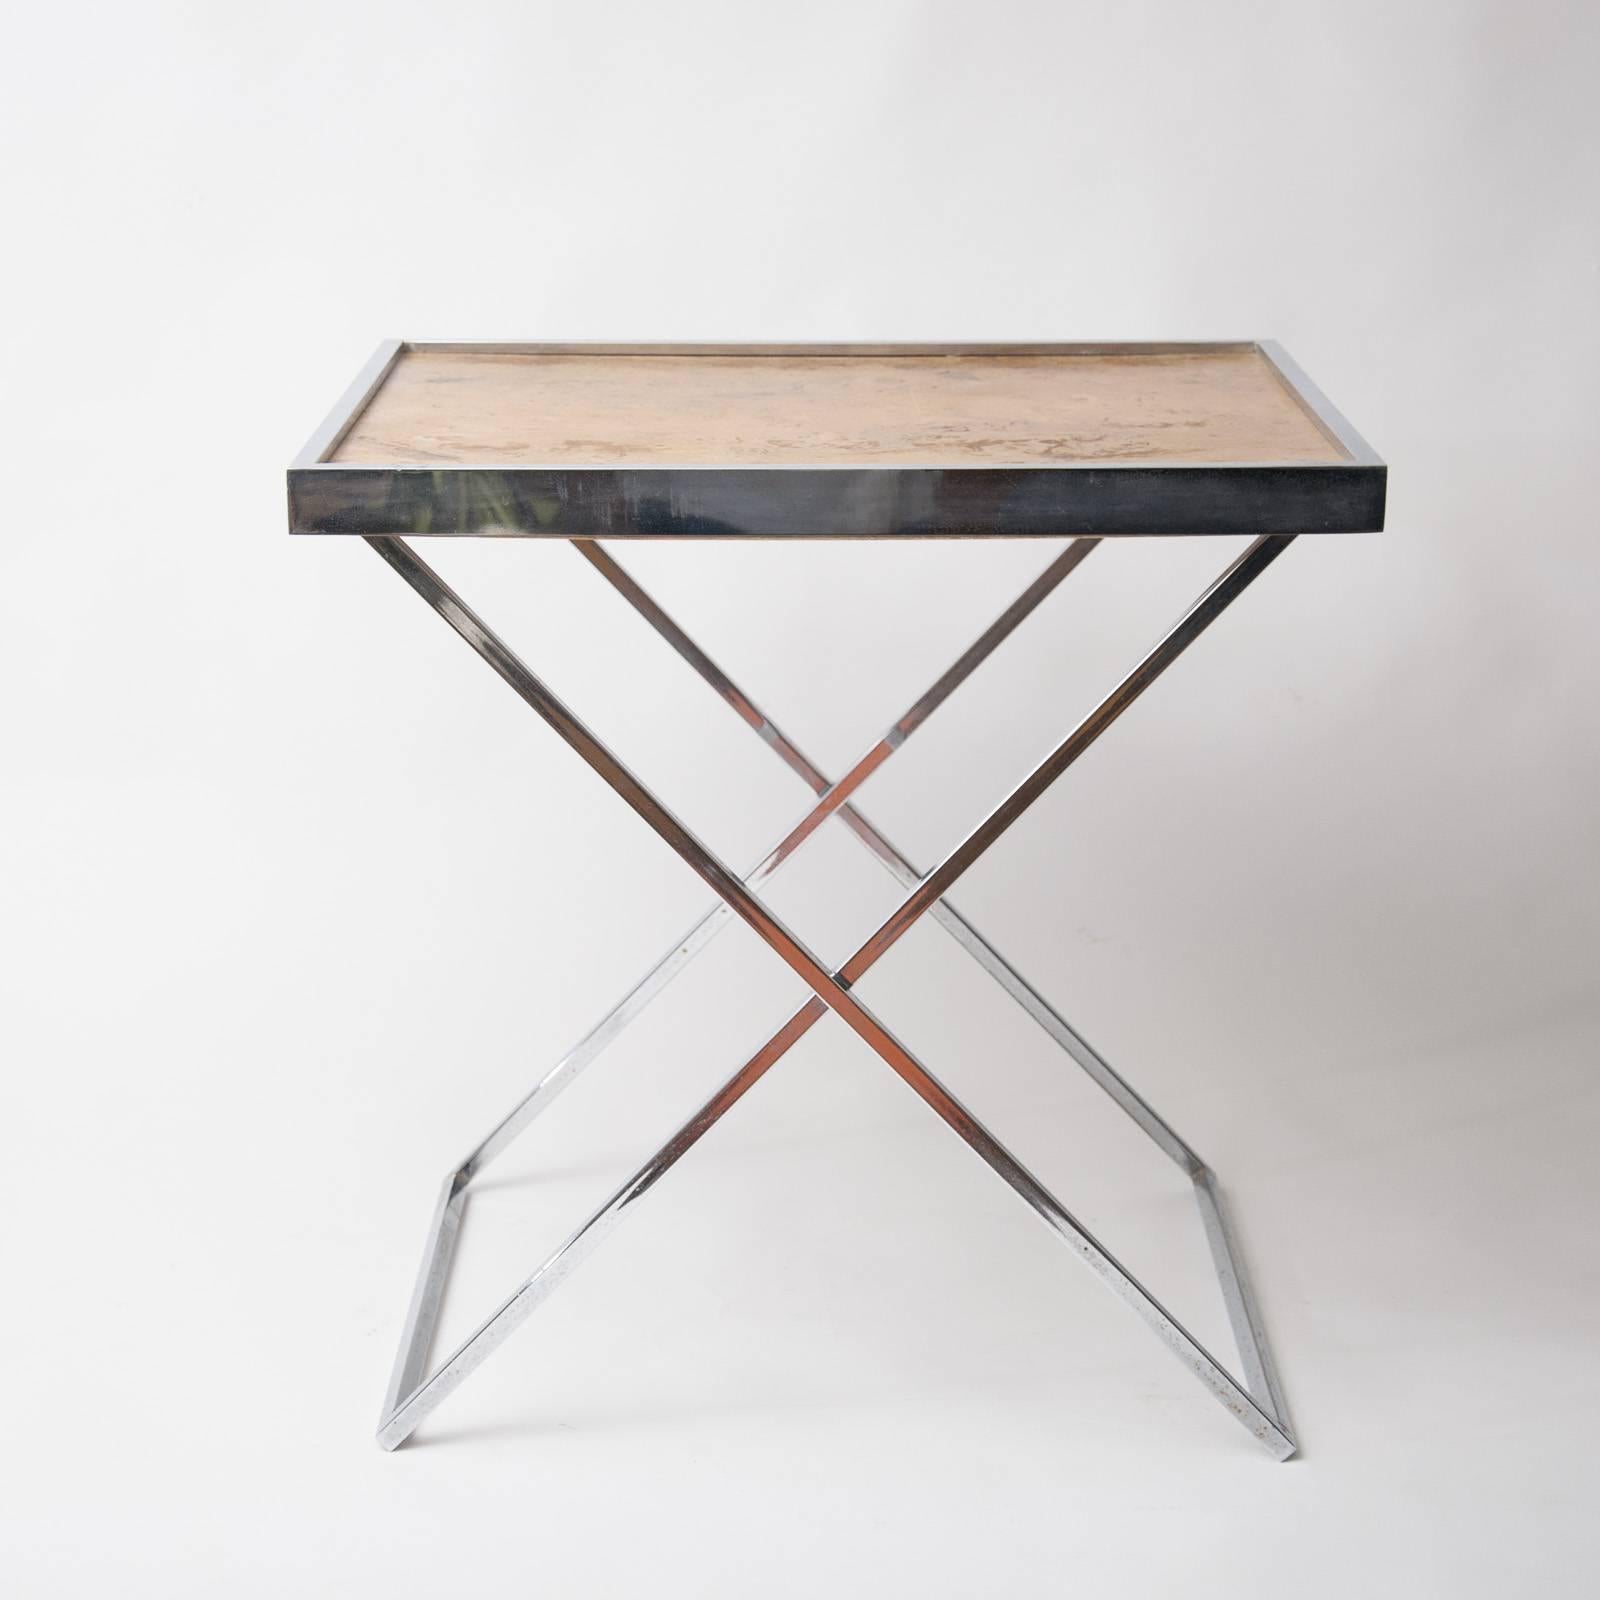 Simple and stylish chrome and burr walnut (?) tray table. Tray can be removed from the X-frame base, Italy, circa 1970 (made in Italy label to the underside of the tray).